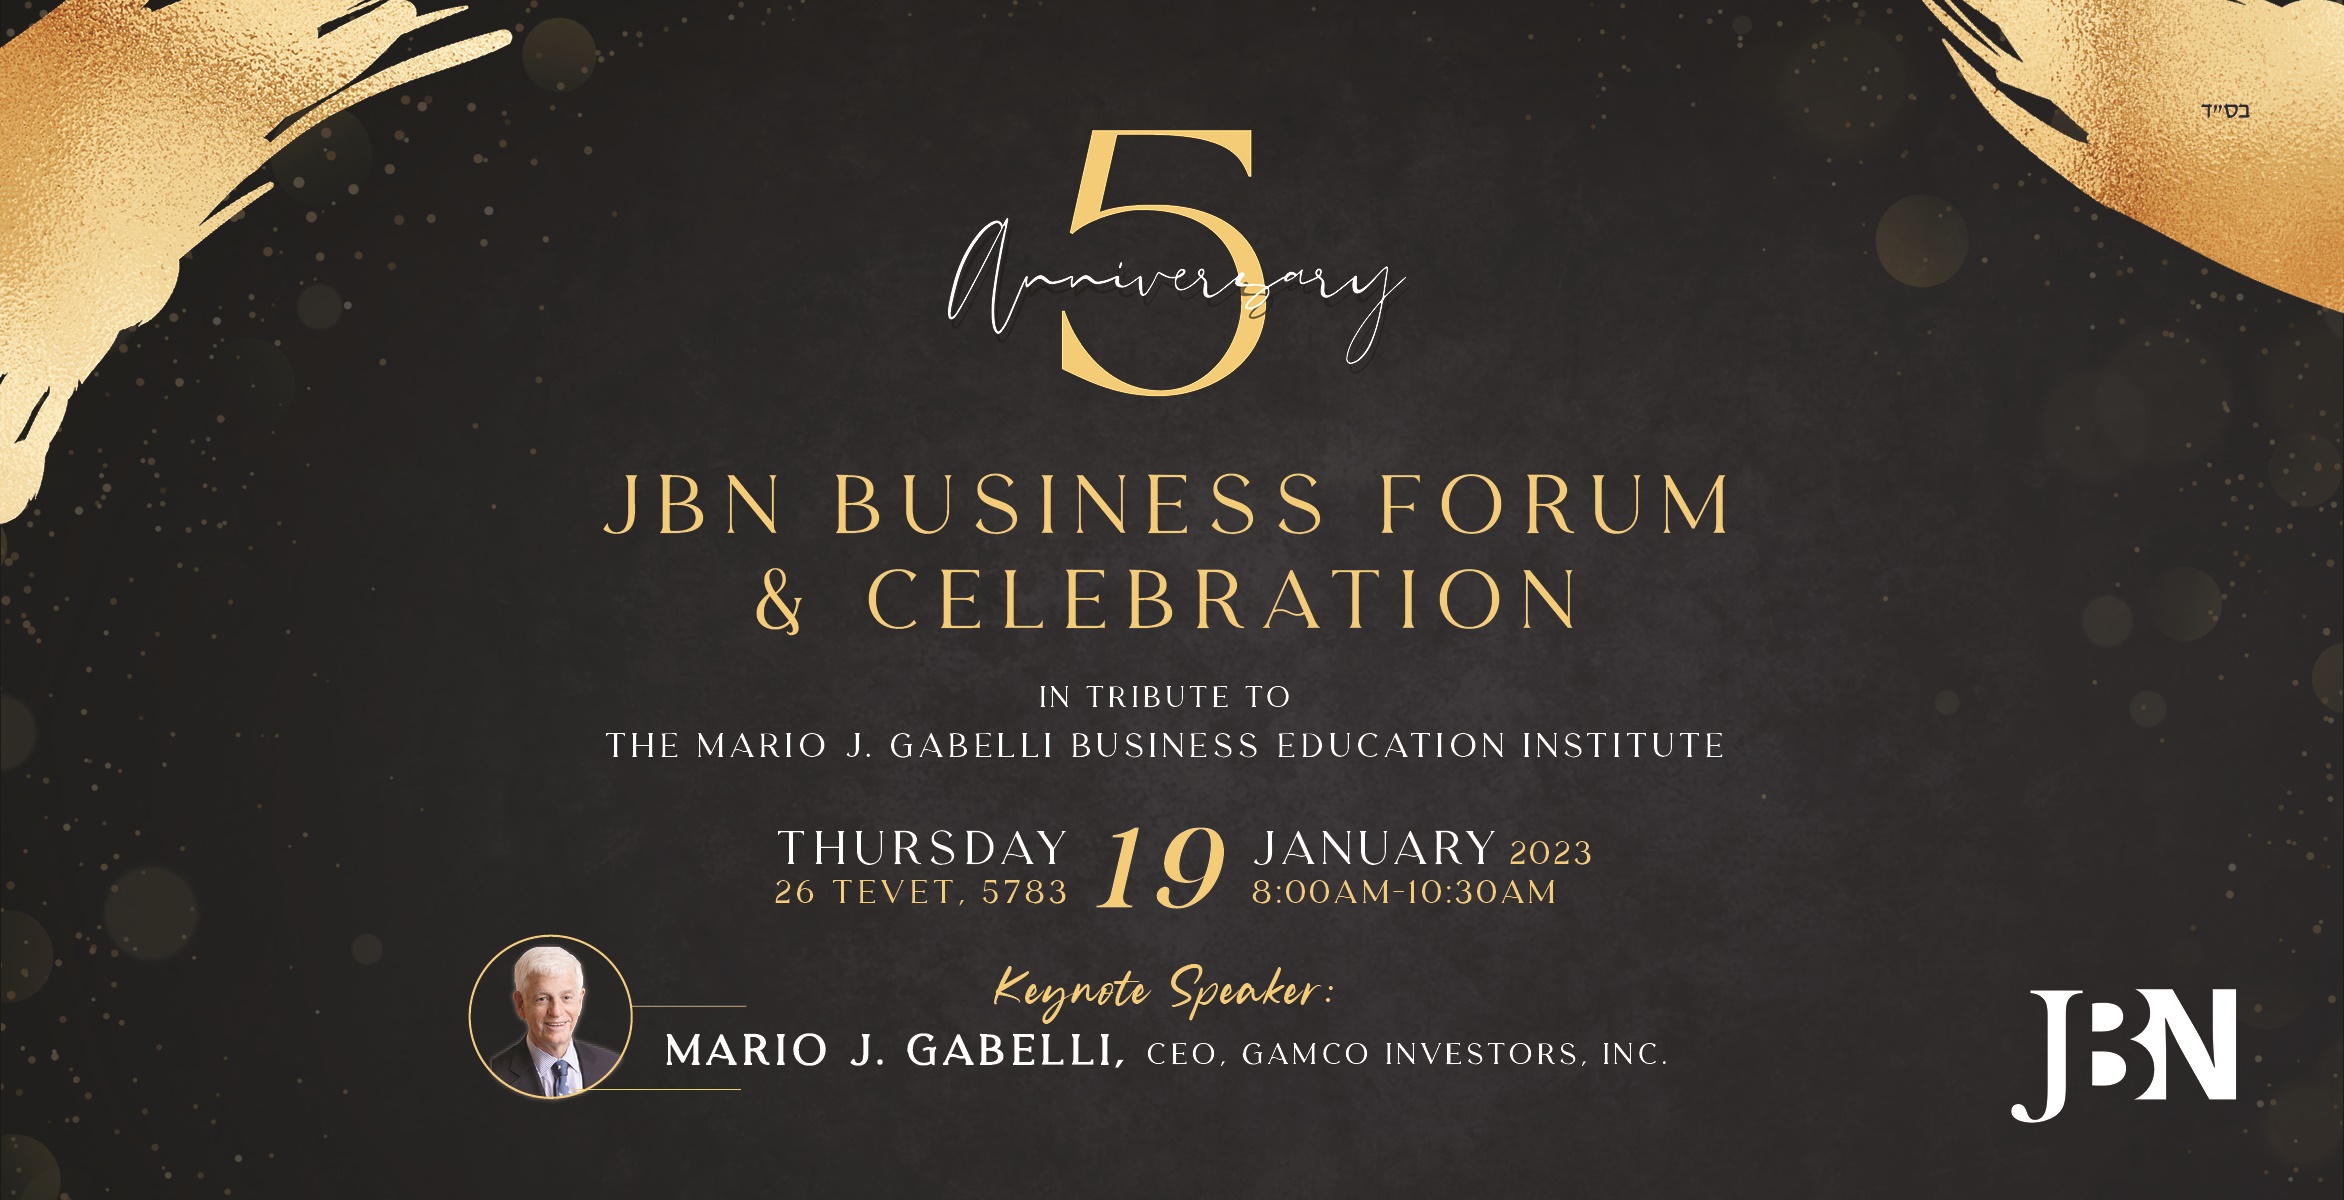 The Jewish Business Network, based in the Rivertowns, Westchester, is hosting a Business Forum & Celebration